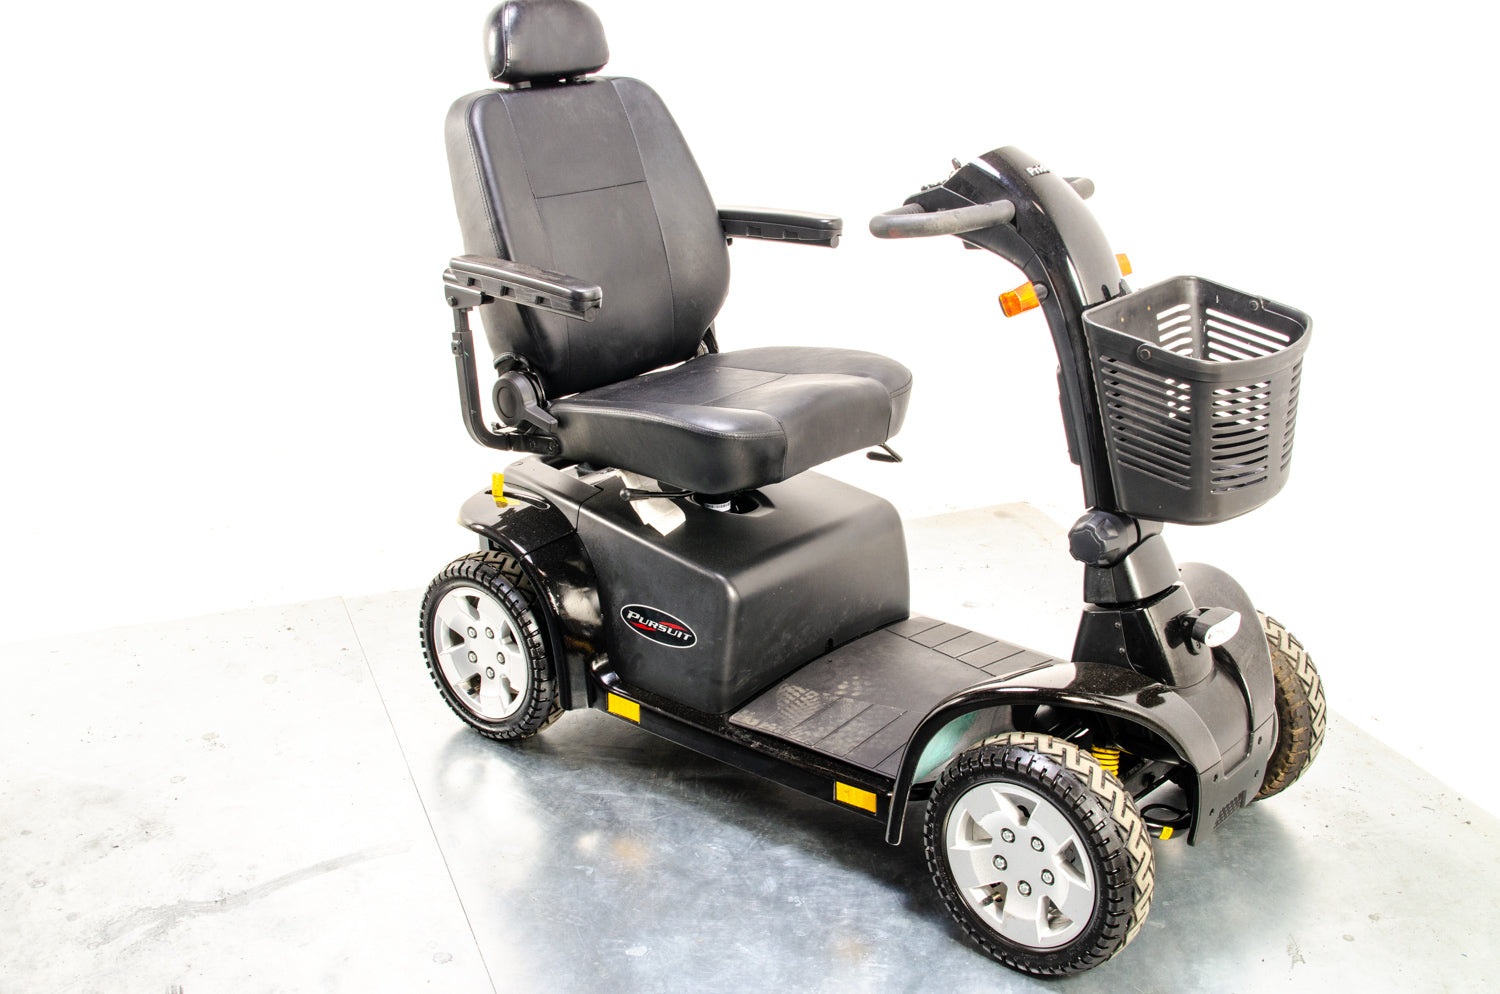 Pride Colt Pursuit All-Terrain Off-Road Used Mobility Scooter 8mph Transportable Large Off-Road Road Legal Black 13952